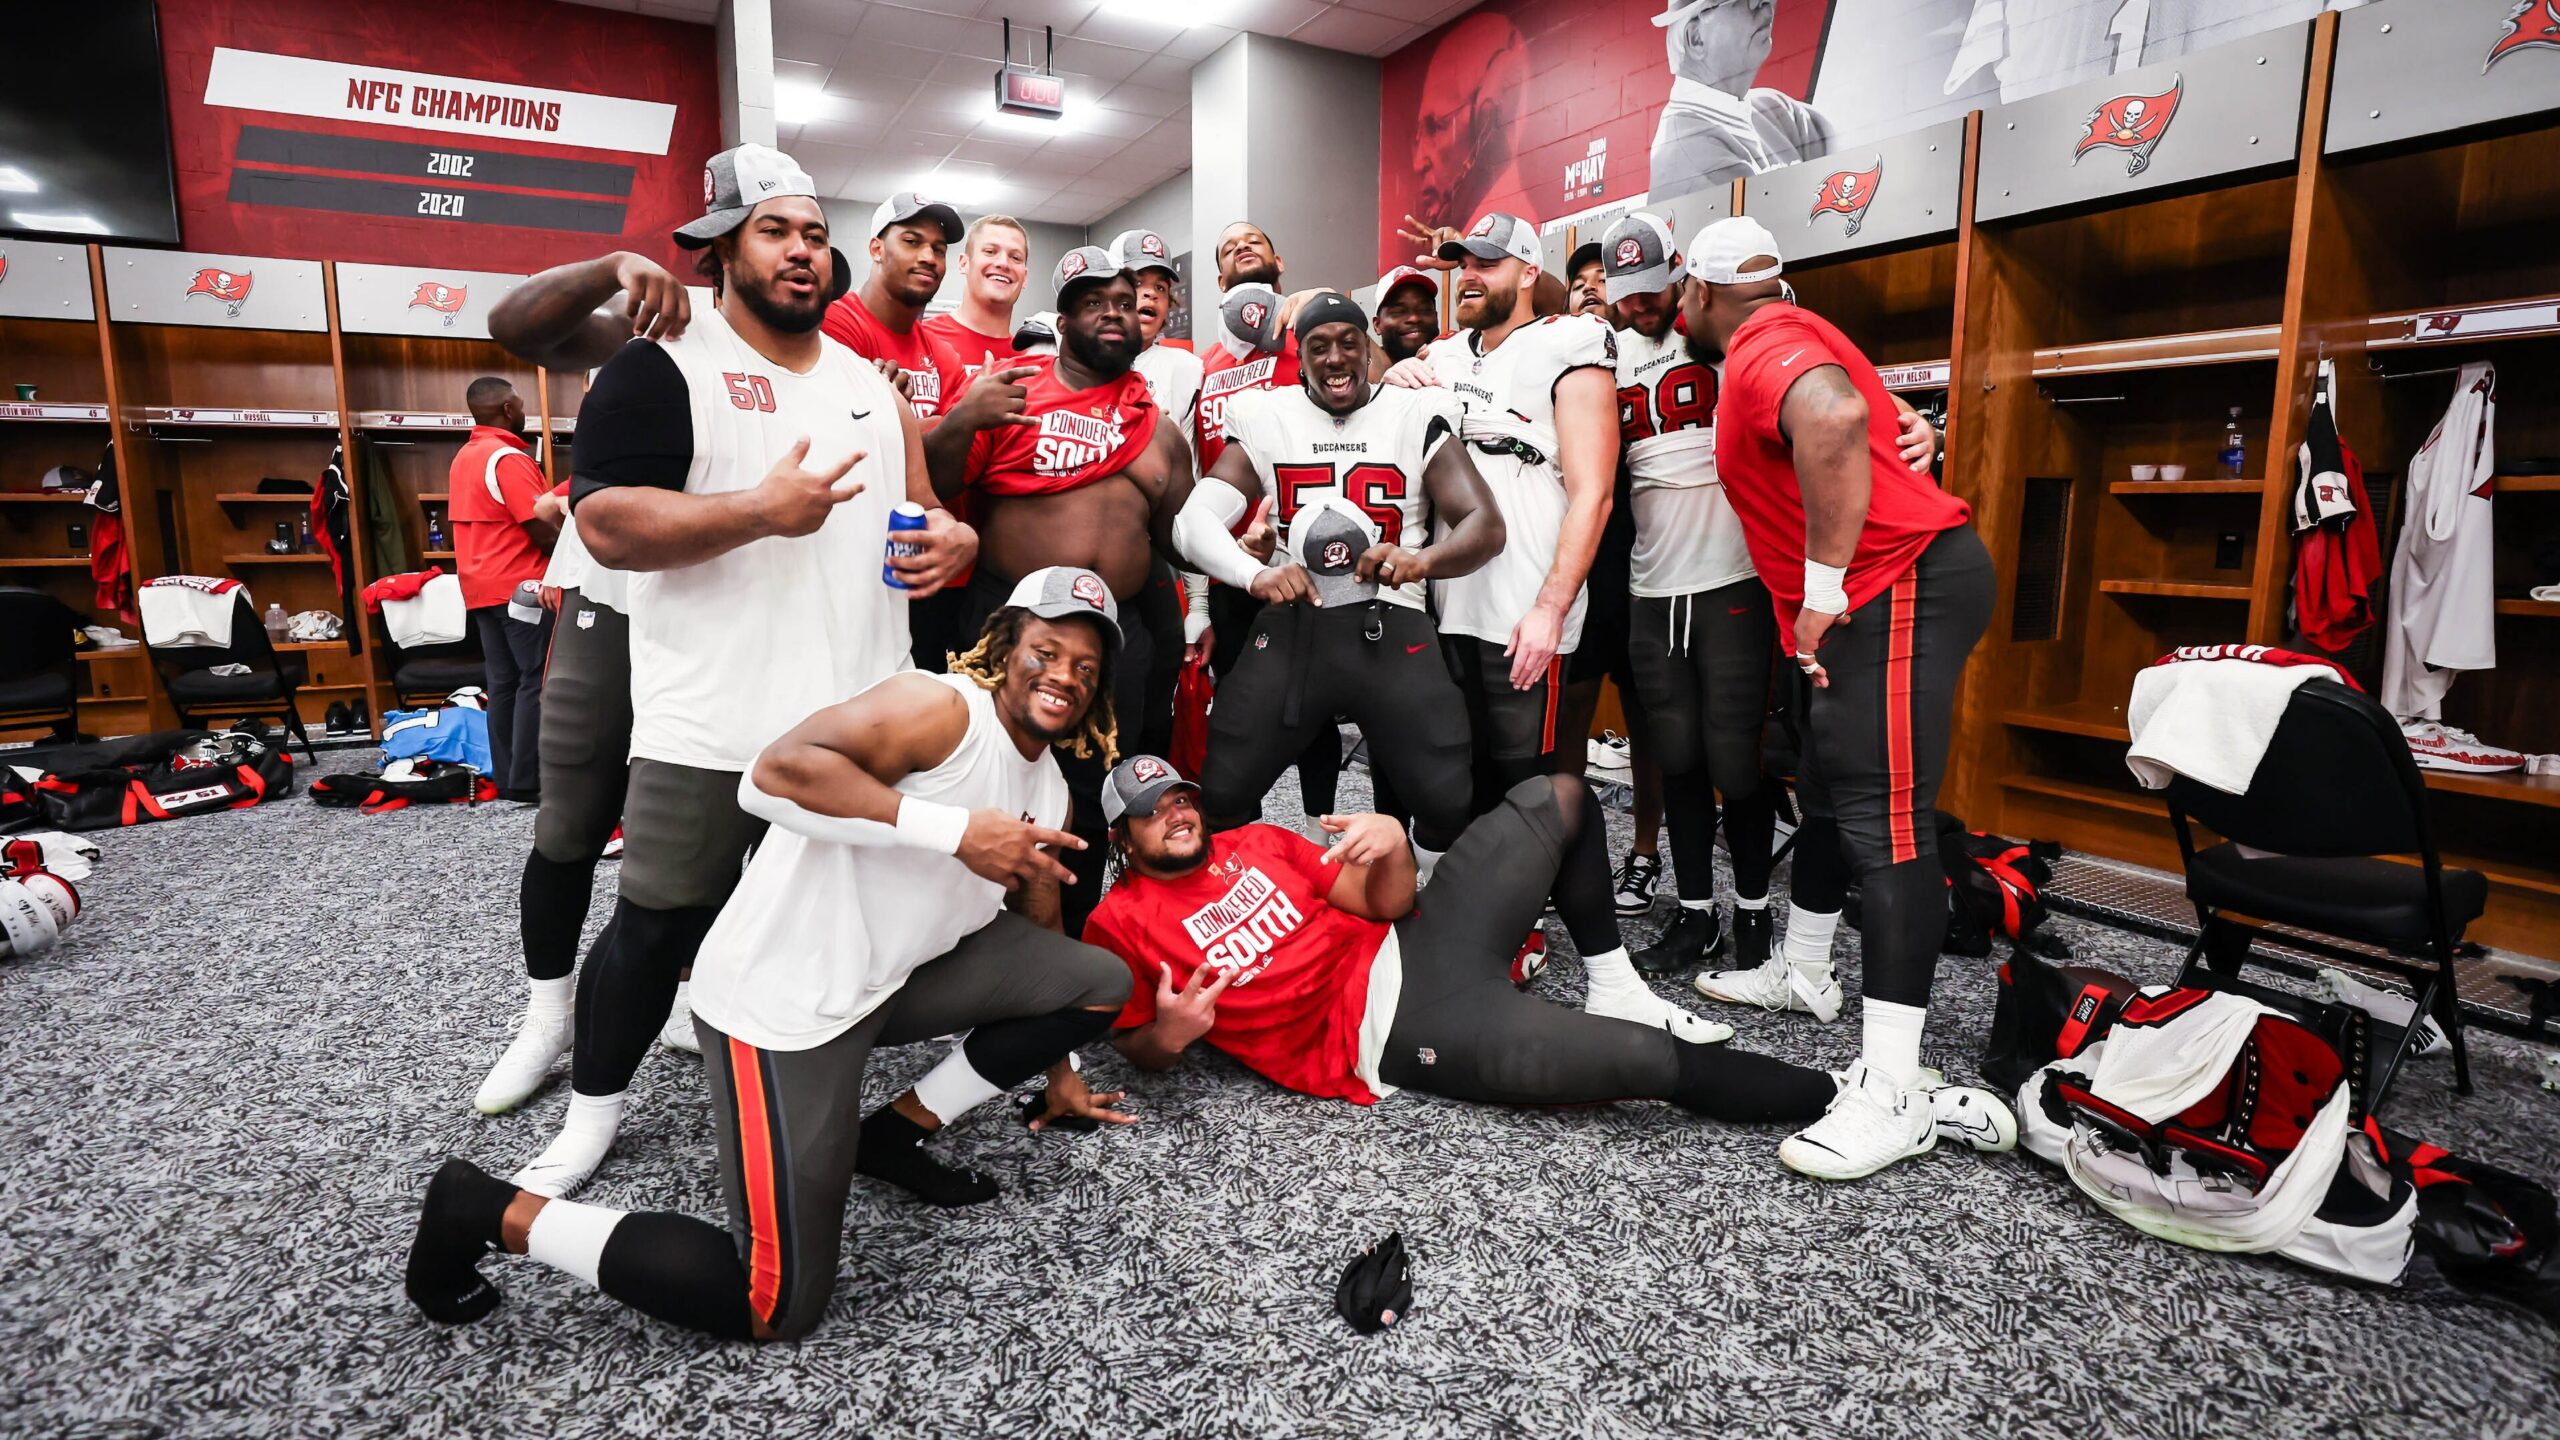 Buccaneers' players celebrate their division title / via buccaneers.com